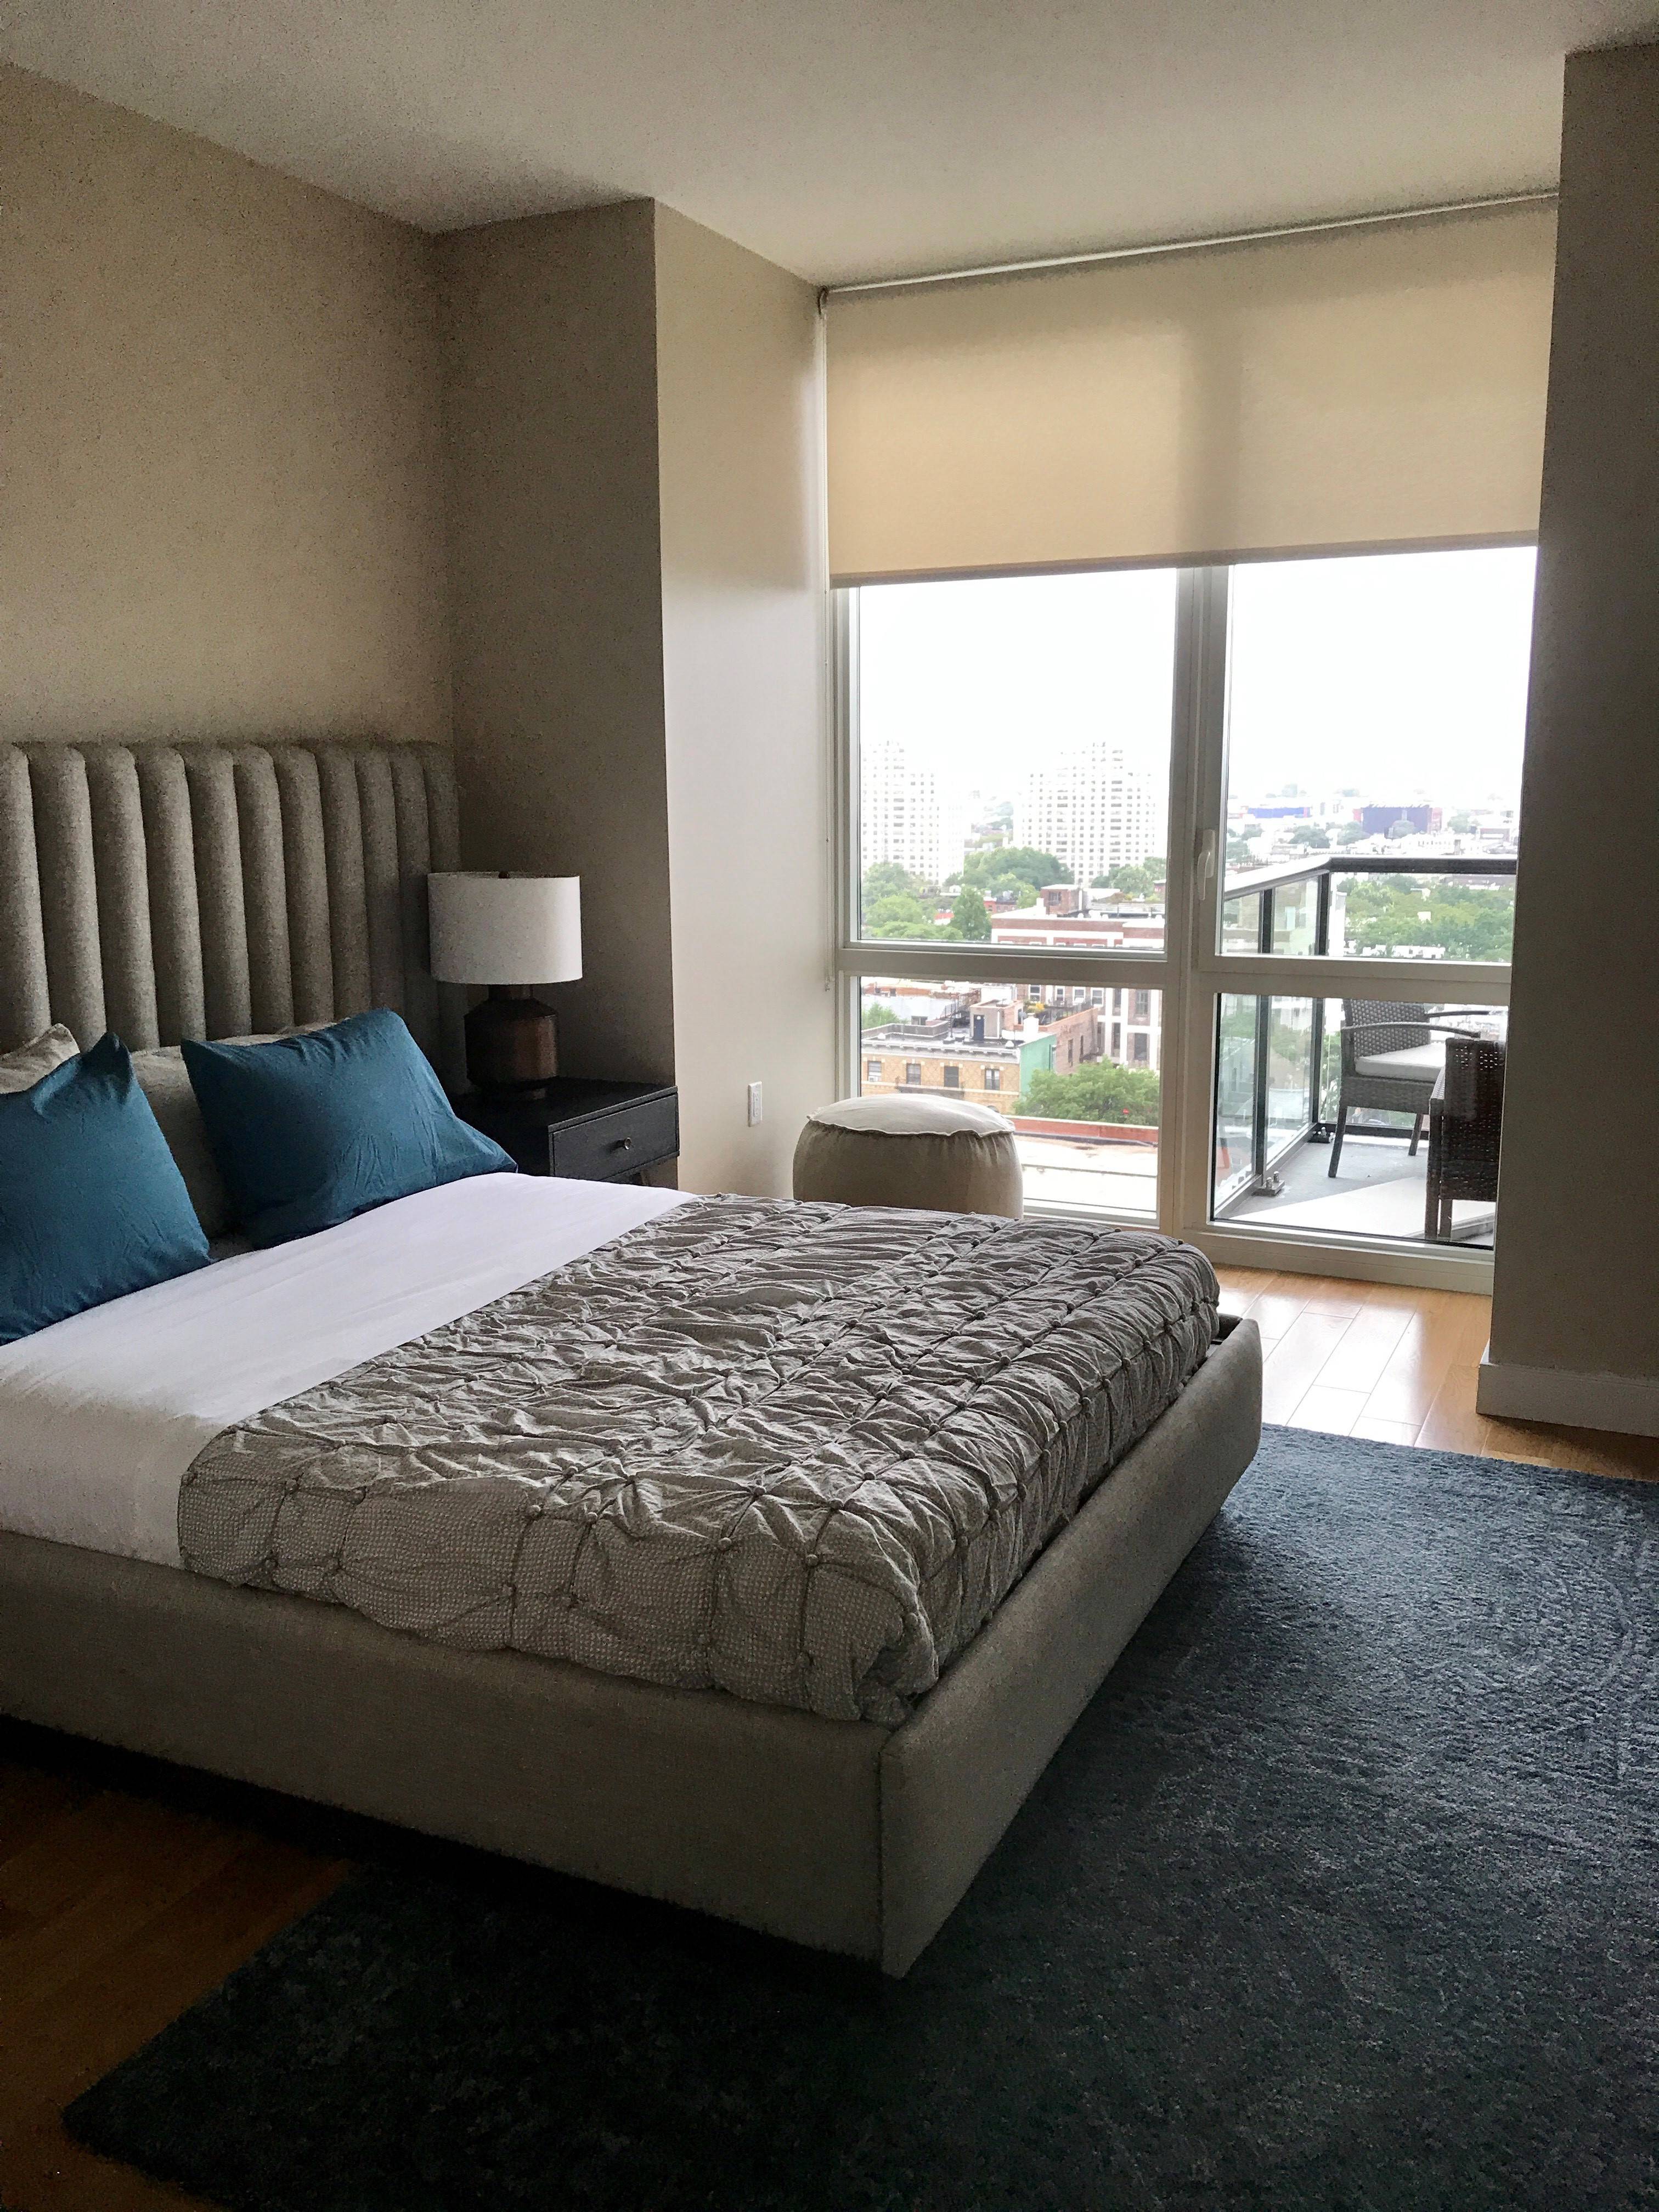 Brand New Luxury 1 Bed in Downtown Brooklyn - w/d, gym, roofdeck, doorman